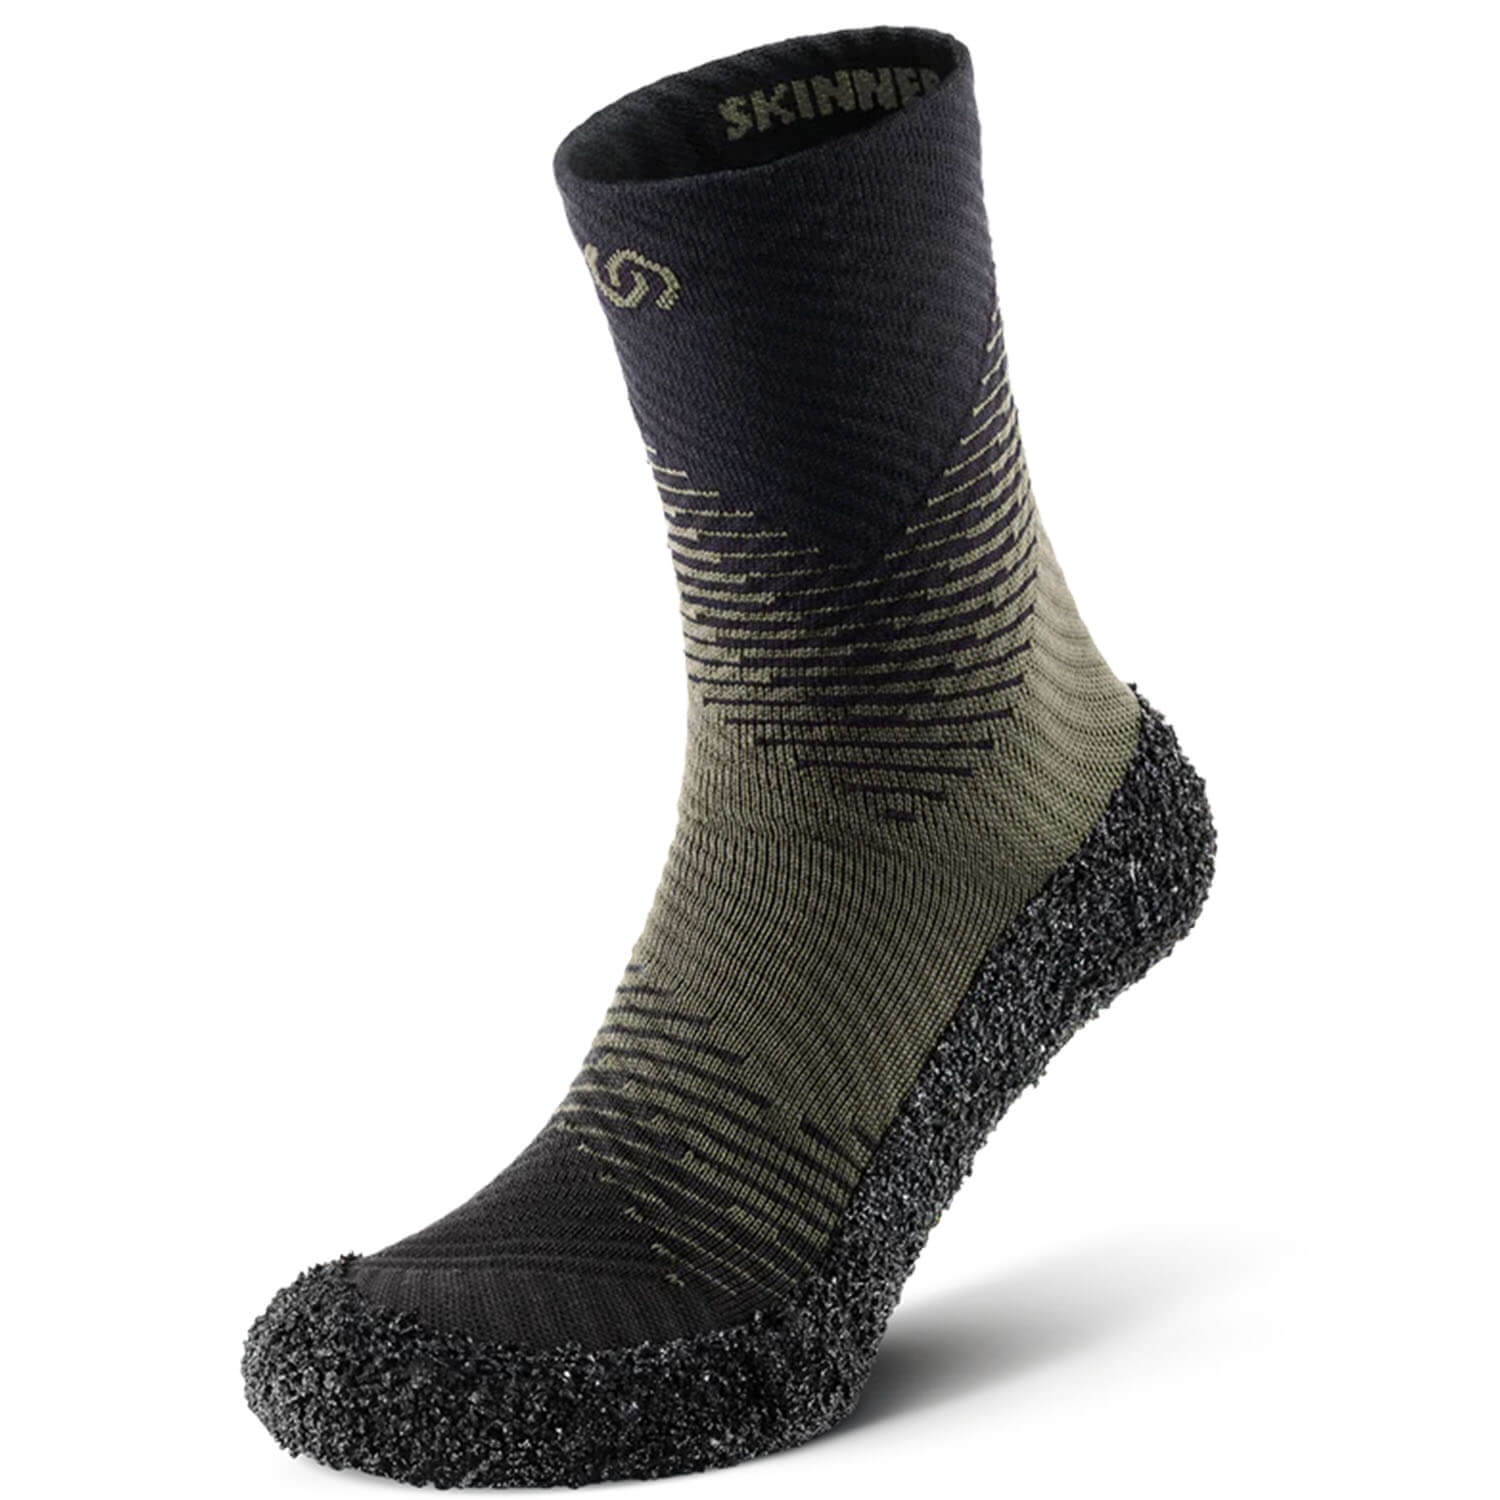 Skinners stalking socks Compression 2.0 (pine) - Hunting Boots